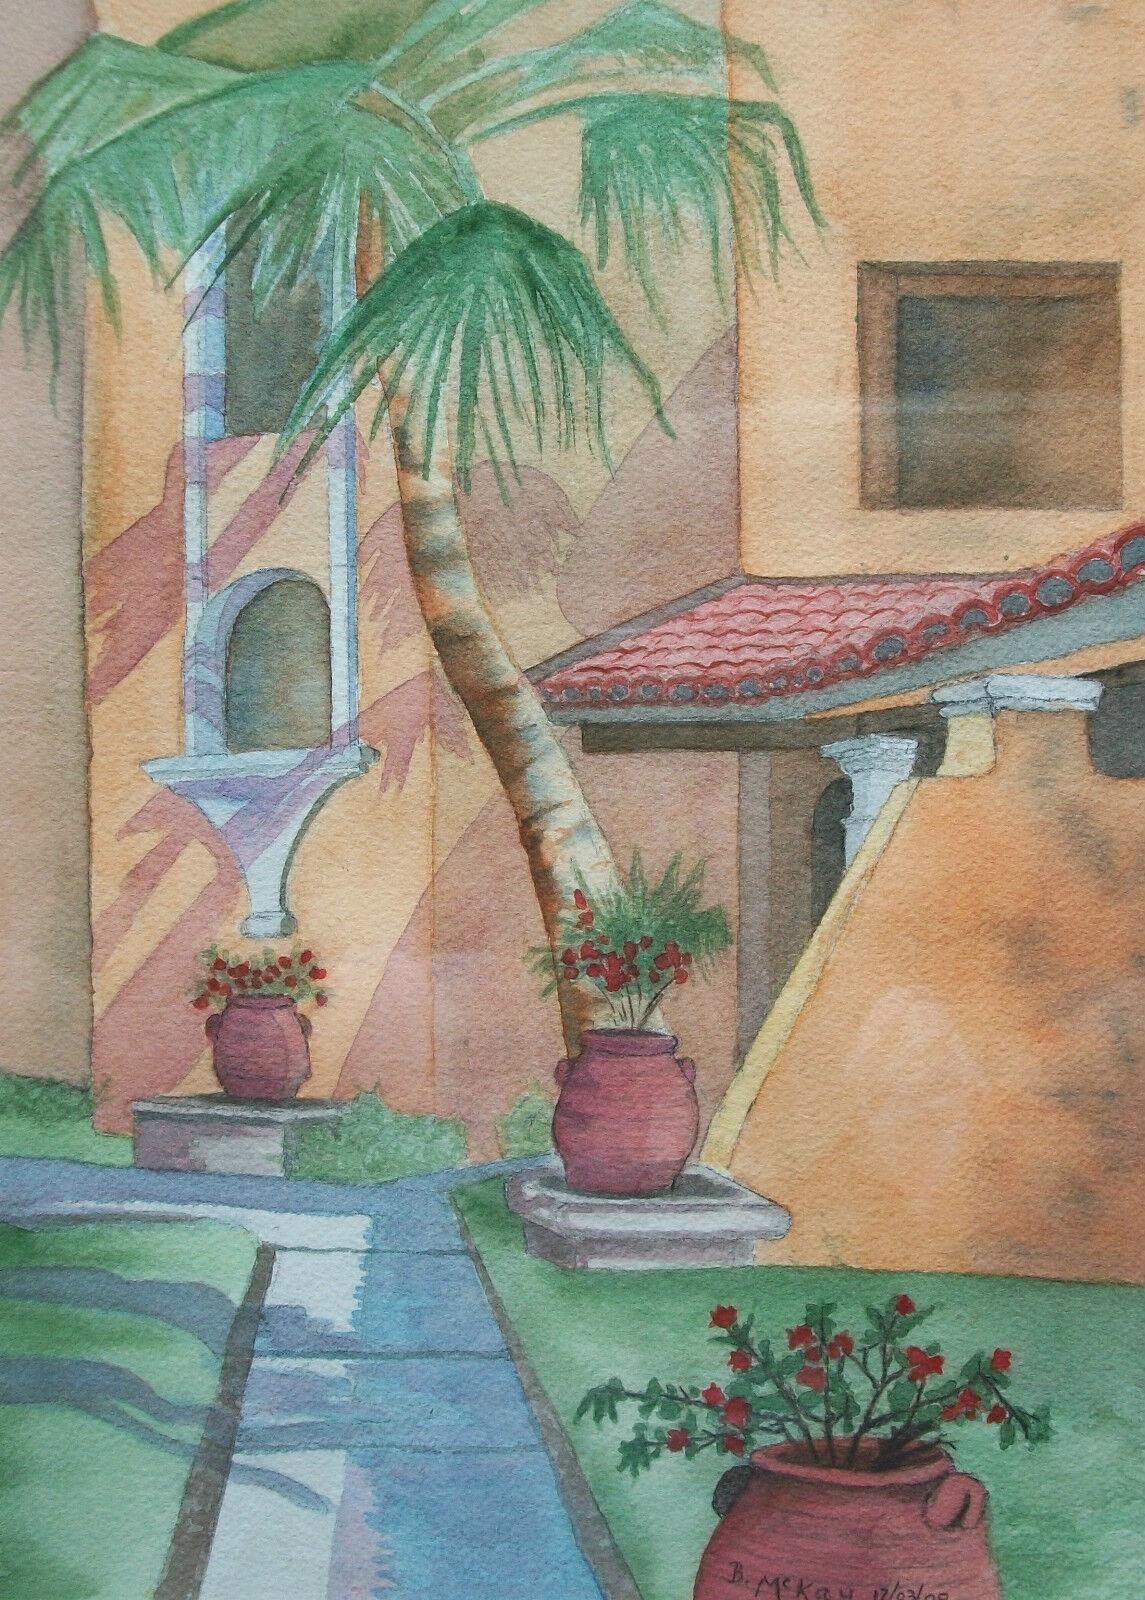 American B. McKay, 'La Jolla', Framed Watercolor Painting, Signed & Dated, circa 2000 For Sale